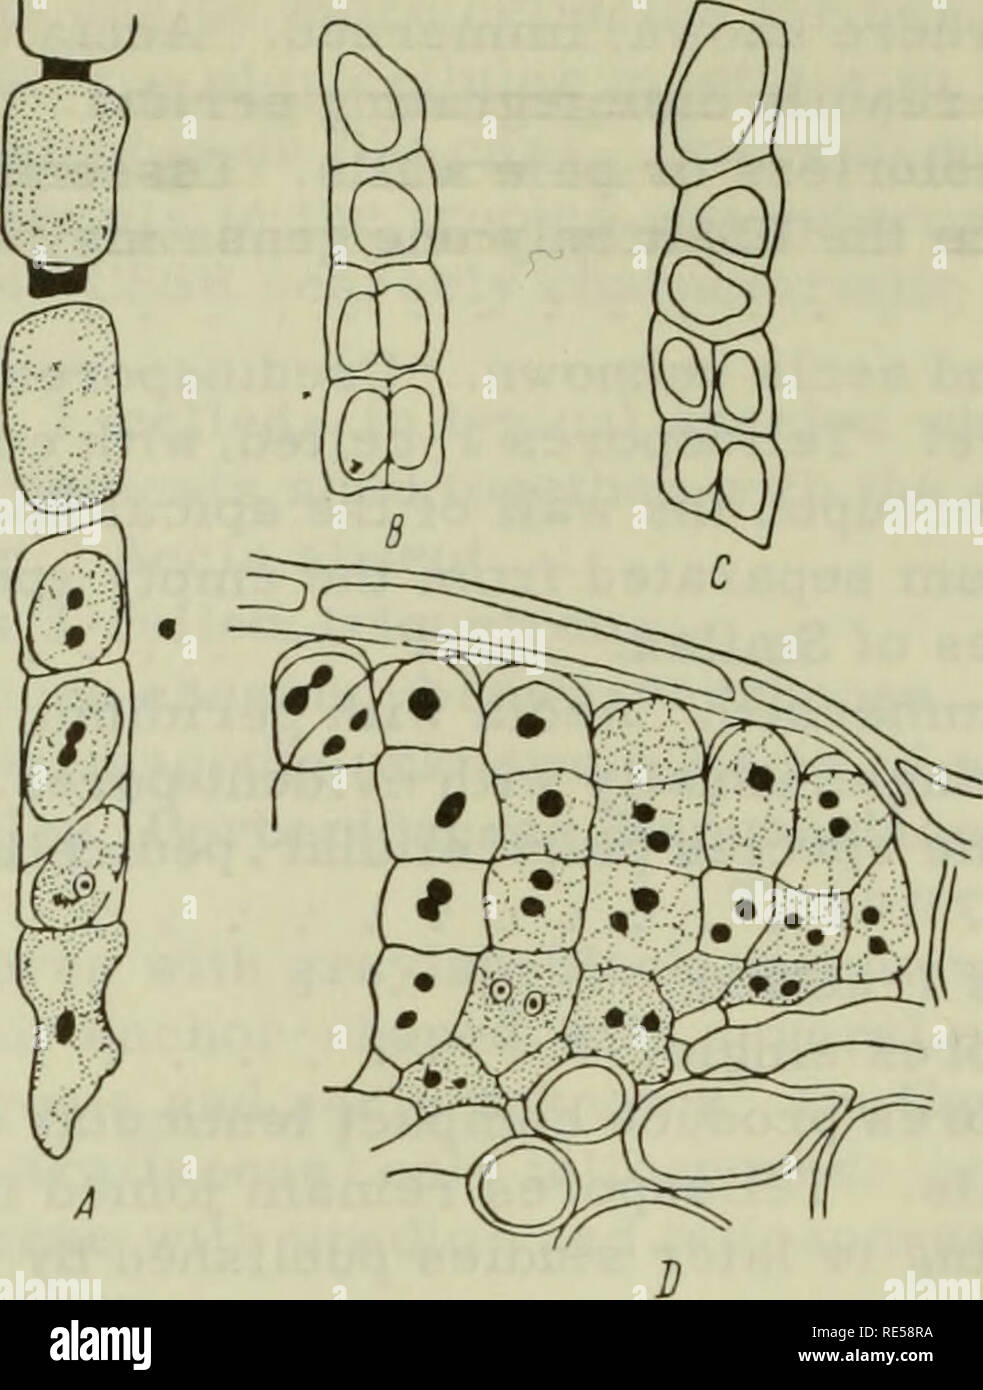 . Cryptogamic plants of the USSR. (Flora sporovykh rastenii SSSR). Plants. (59). FIGURE 7. Pucciniostele mandschurica Diet. : A — basal cell with elongate composite chain (at the top 3 aeciospores and intercalary cells, underneath 3 mother-cells of the primary telio- spore); B, C — 2 chain fragments of the pri- mary teliospore; D — margin of secondary teli- um. (After L.I.Kursanov, N.I. Tseshinskaya, E.S.Klvushnikova, 1936.) RUST FUNGI AS INDICATORS OF KINSHIP OF THEIR HOSTS IN CONNECTION WITH THE PHYLOGENESIS OF RUST FUNGI The specific parasitism of fungal species on related plants is sometim Stock Photo